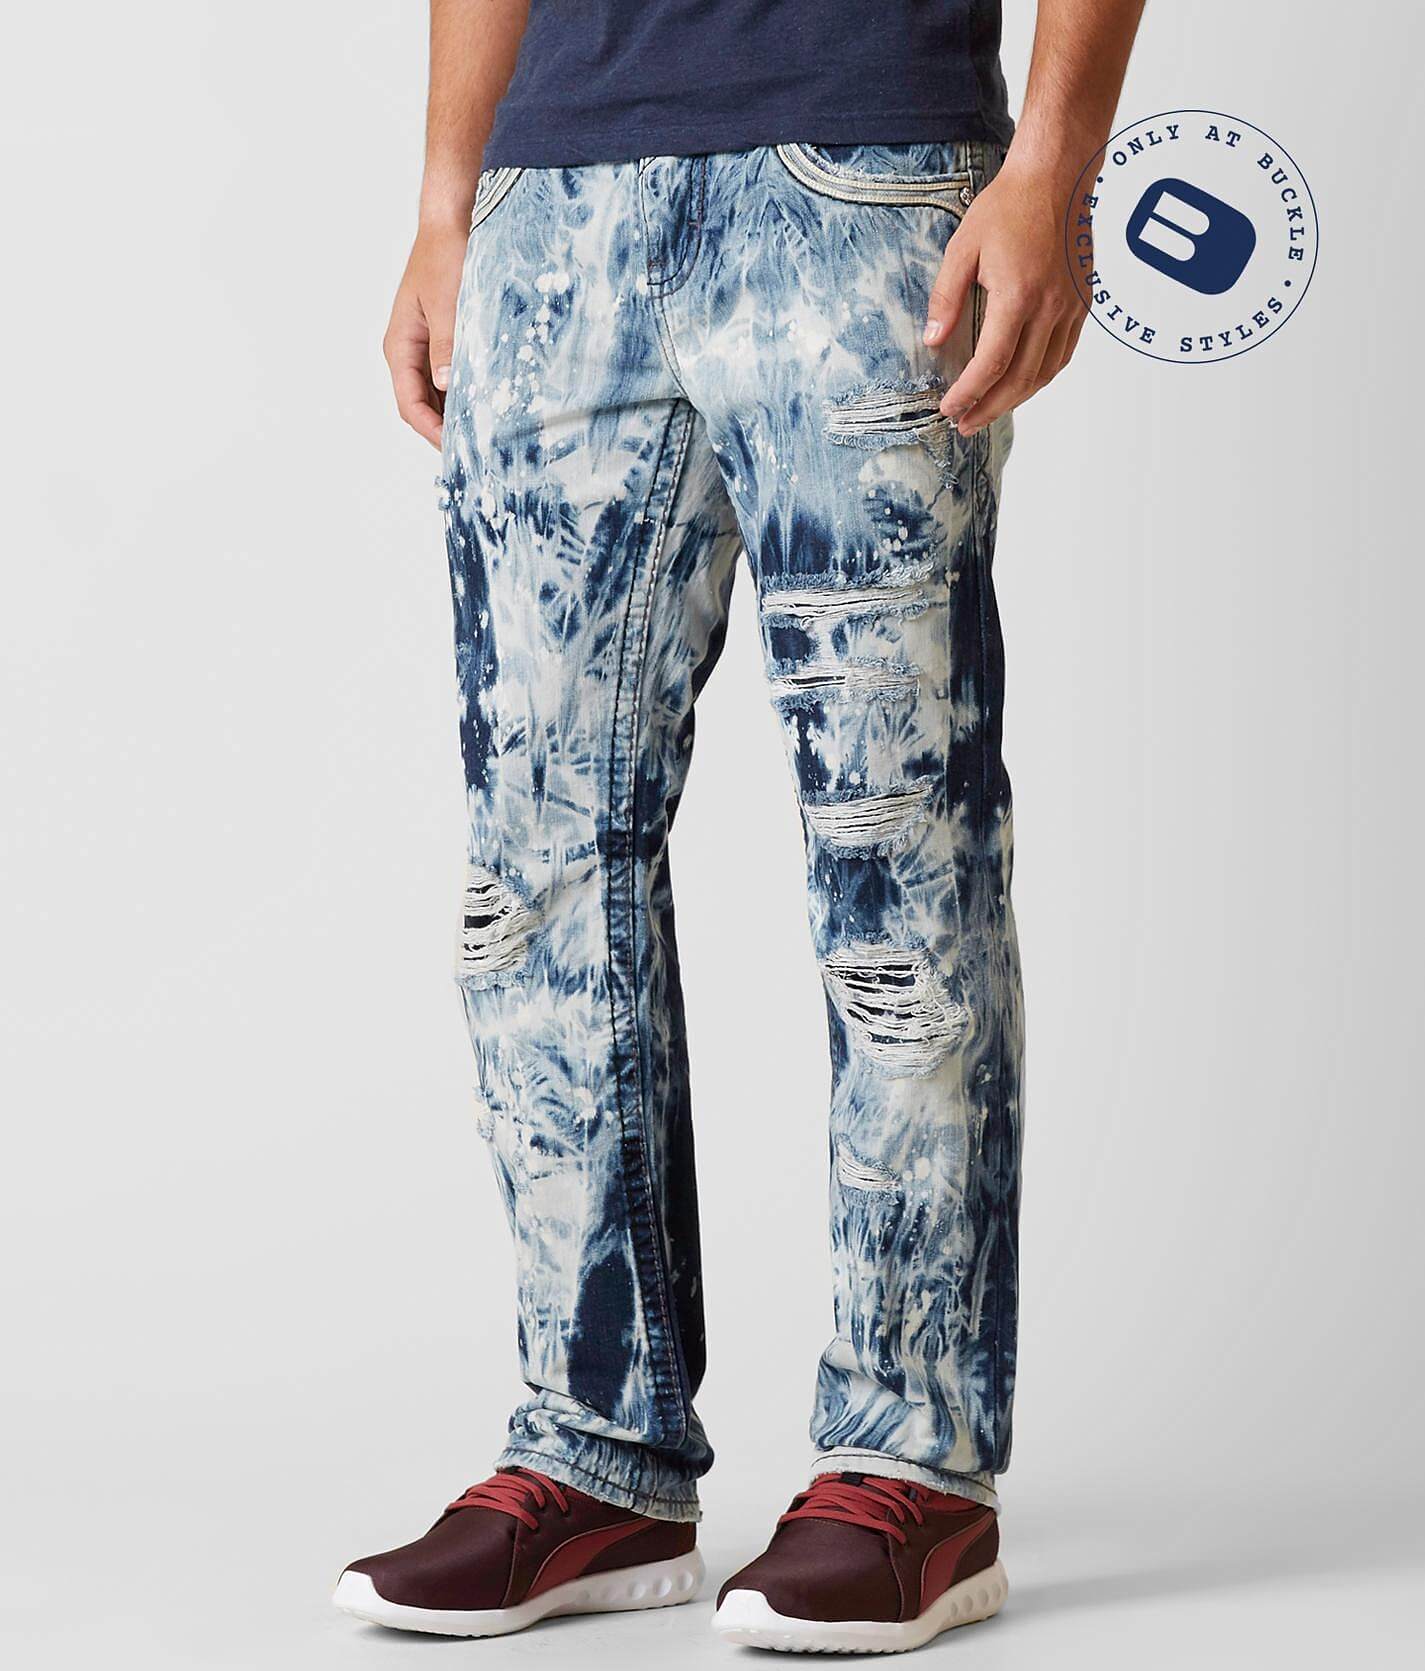 rock revival jeans mens clearance